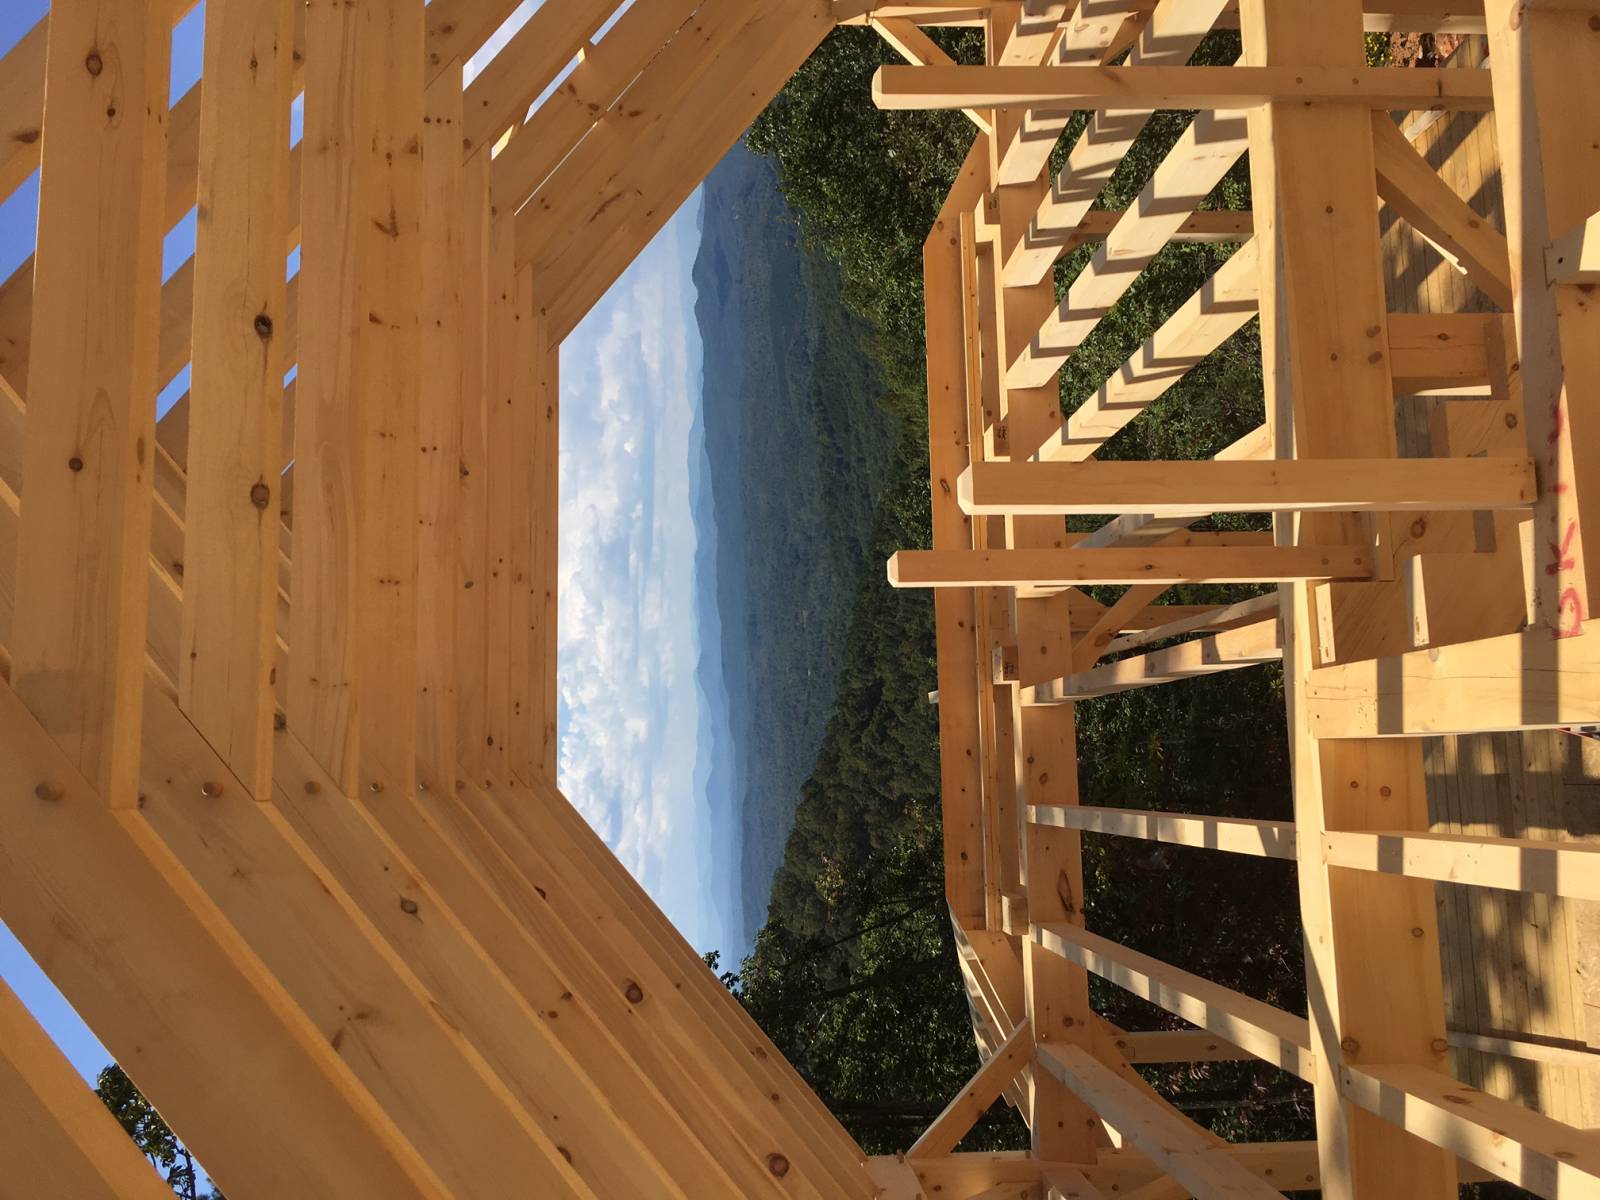 View from the second floor of the timber frame